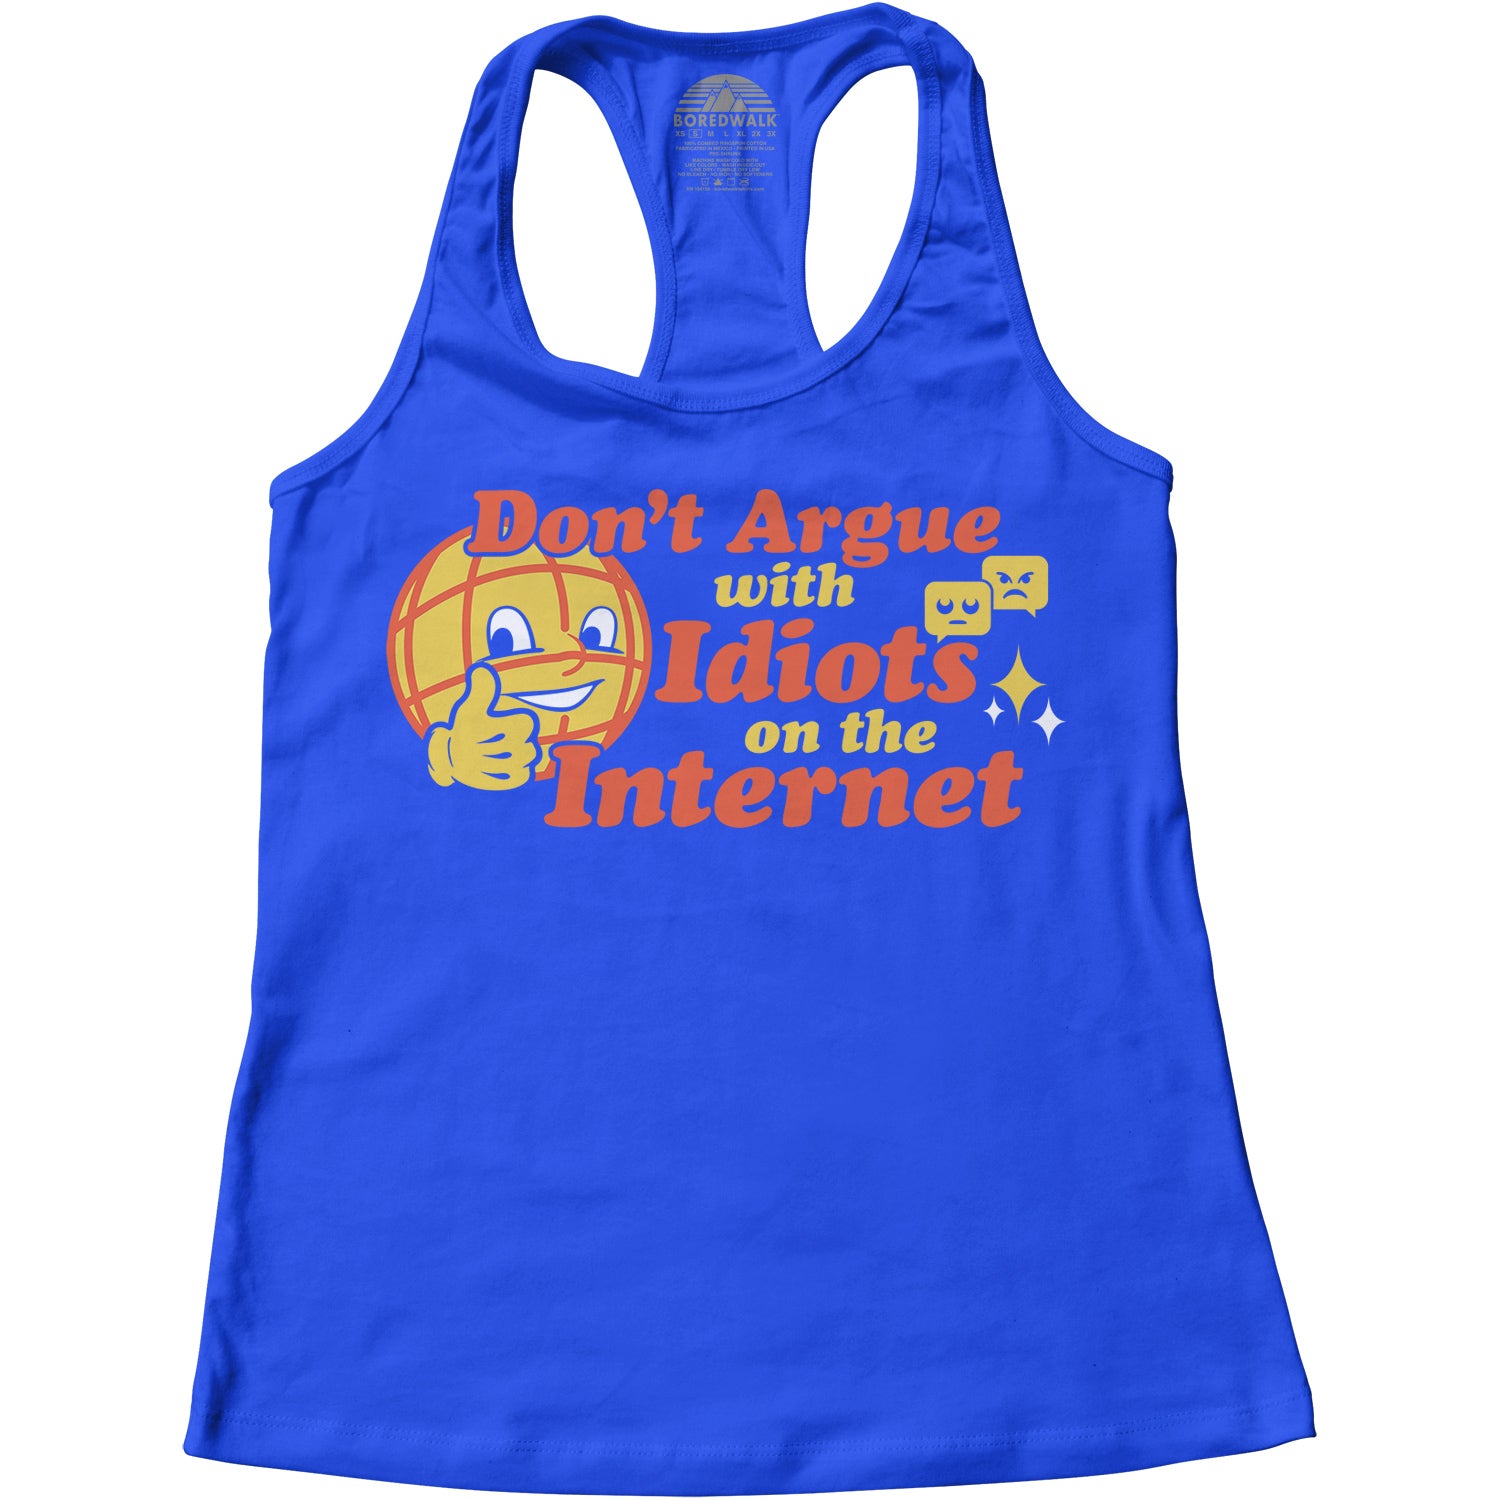 Women's Don't Argue With Idiots On The Internet Racerback Tank Top